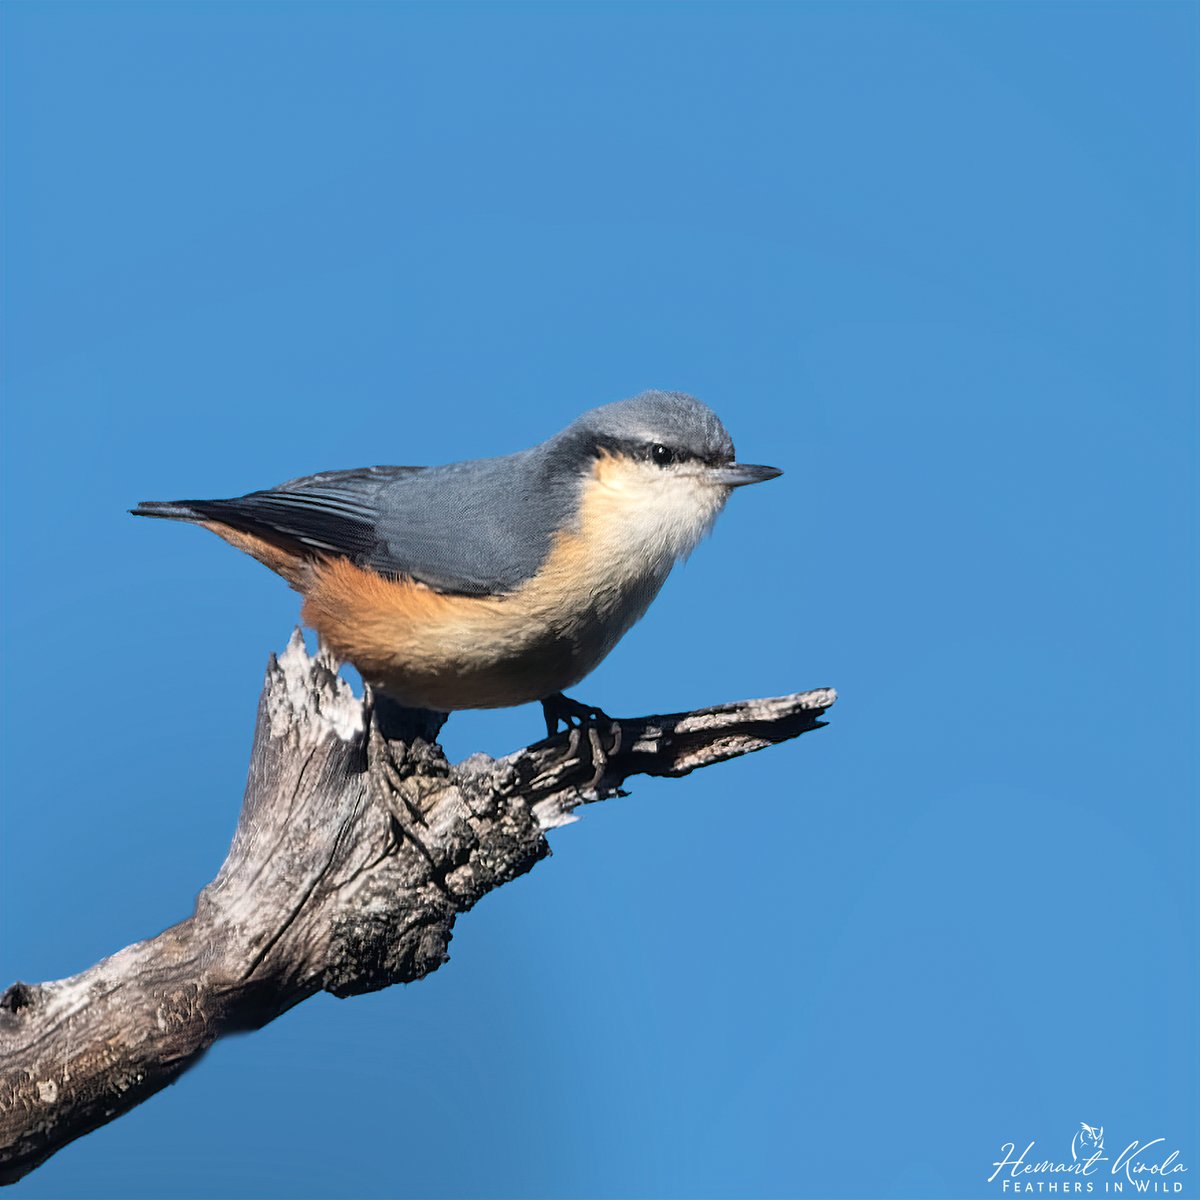 Another one for 'Bird in a Perch'.

Let's fill the X with any bird pic sitting in a perch.

A nuthatch with gray upperparts and pale orange underparts.

White-tailed Nuthatch

#IndiAves #ThePhotoHours #BirdInAPerch